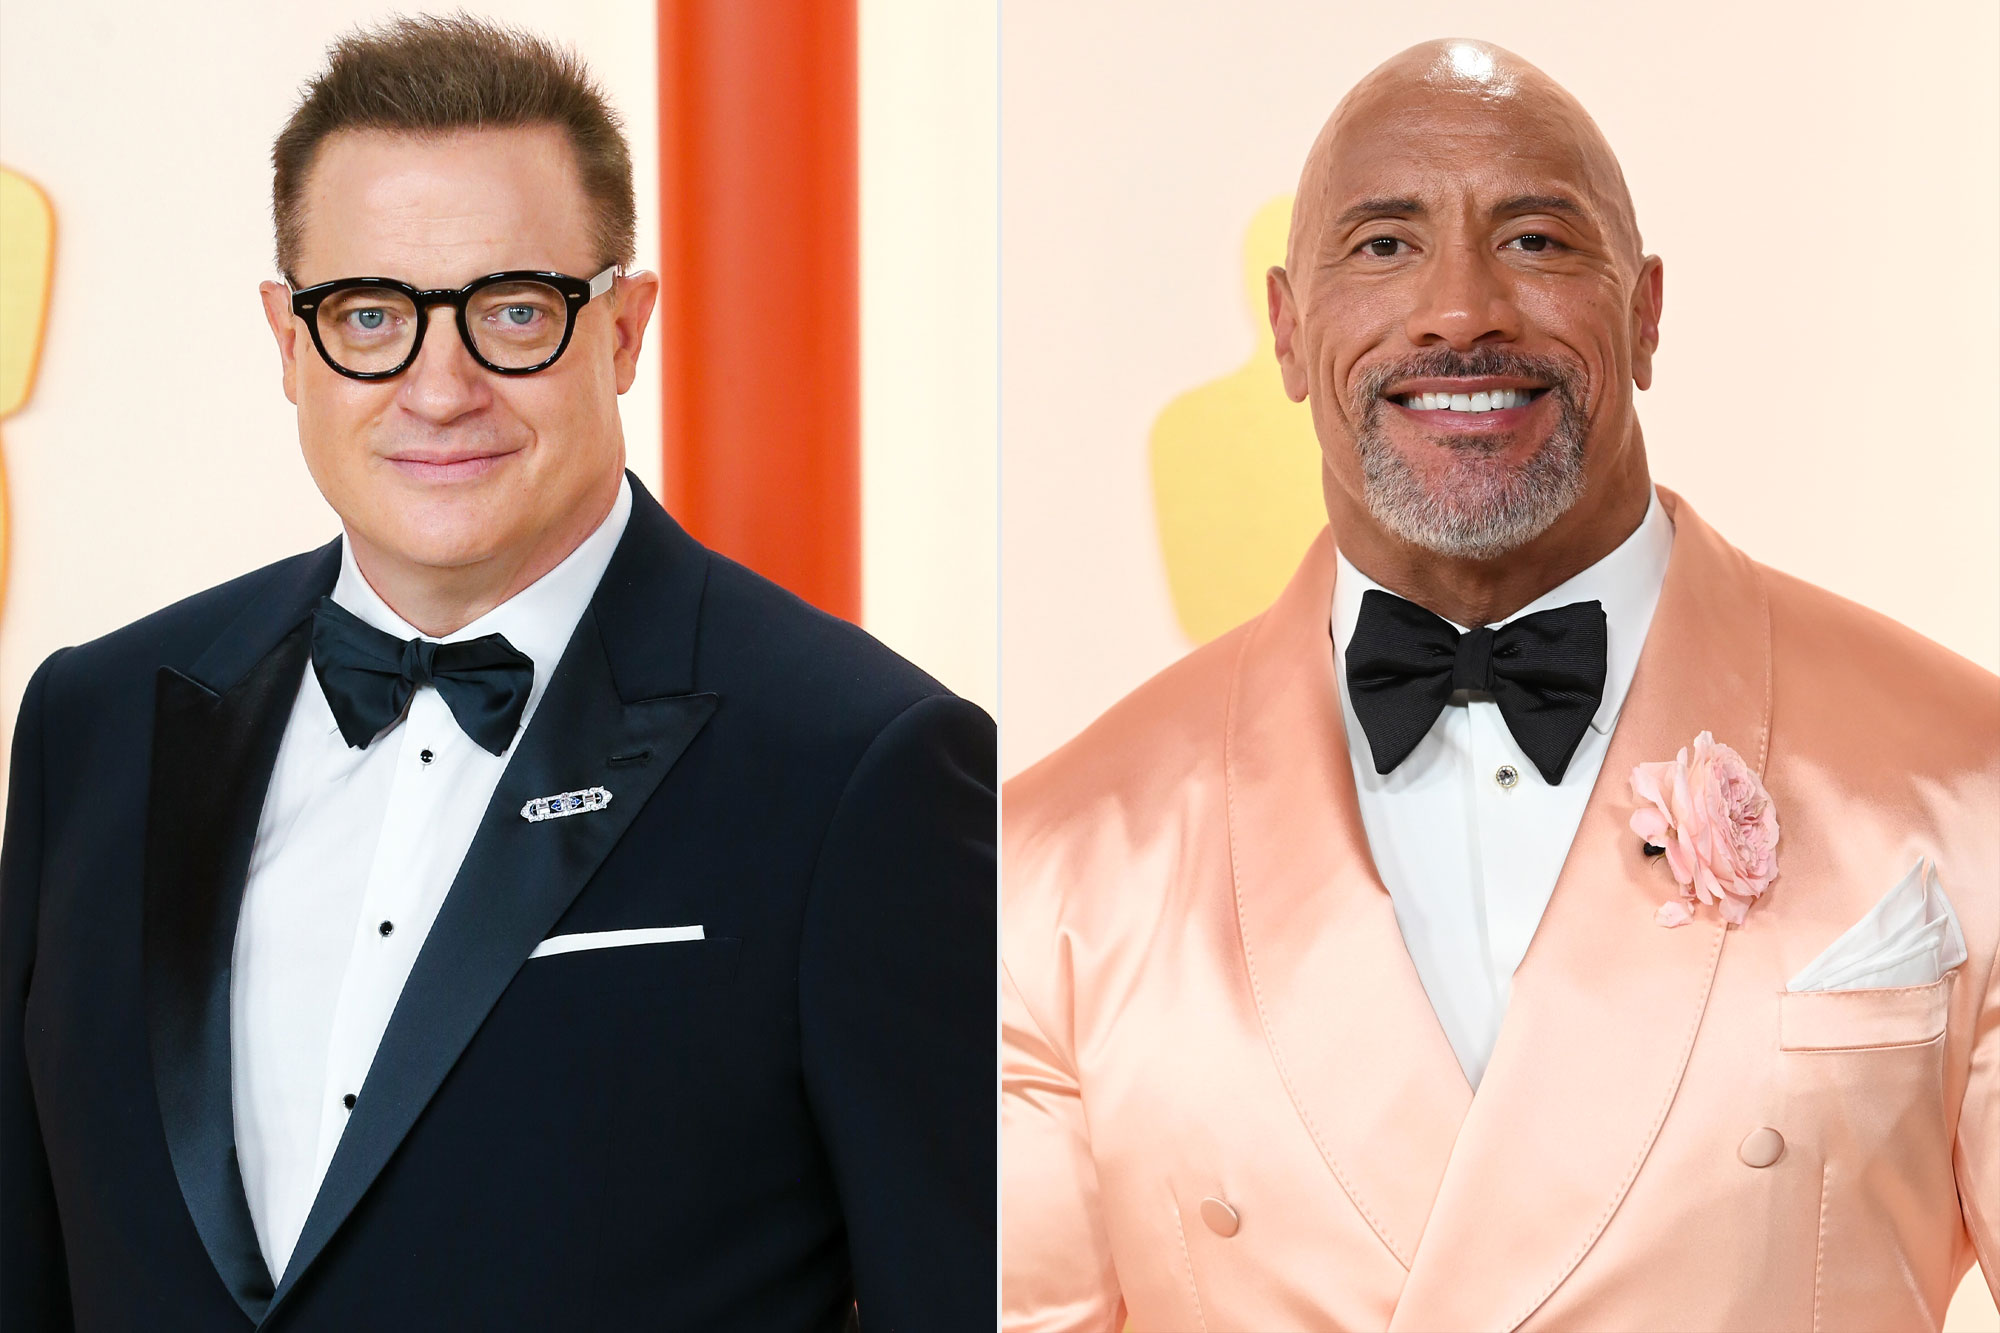 Brendan Fraser and Dwayne Johnson at the 95th Academy Awards